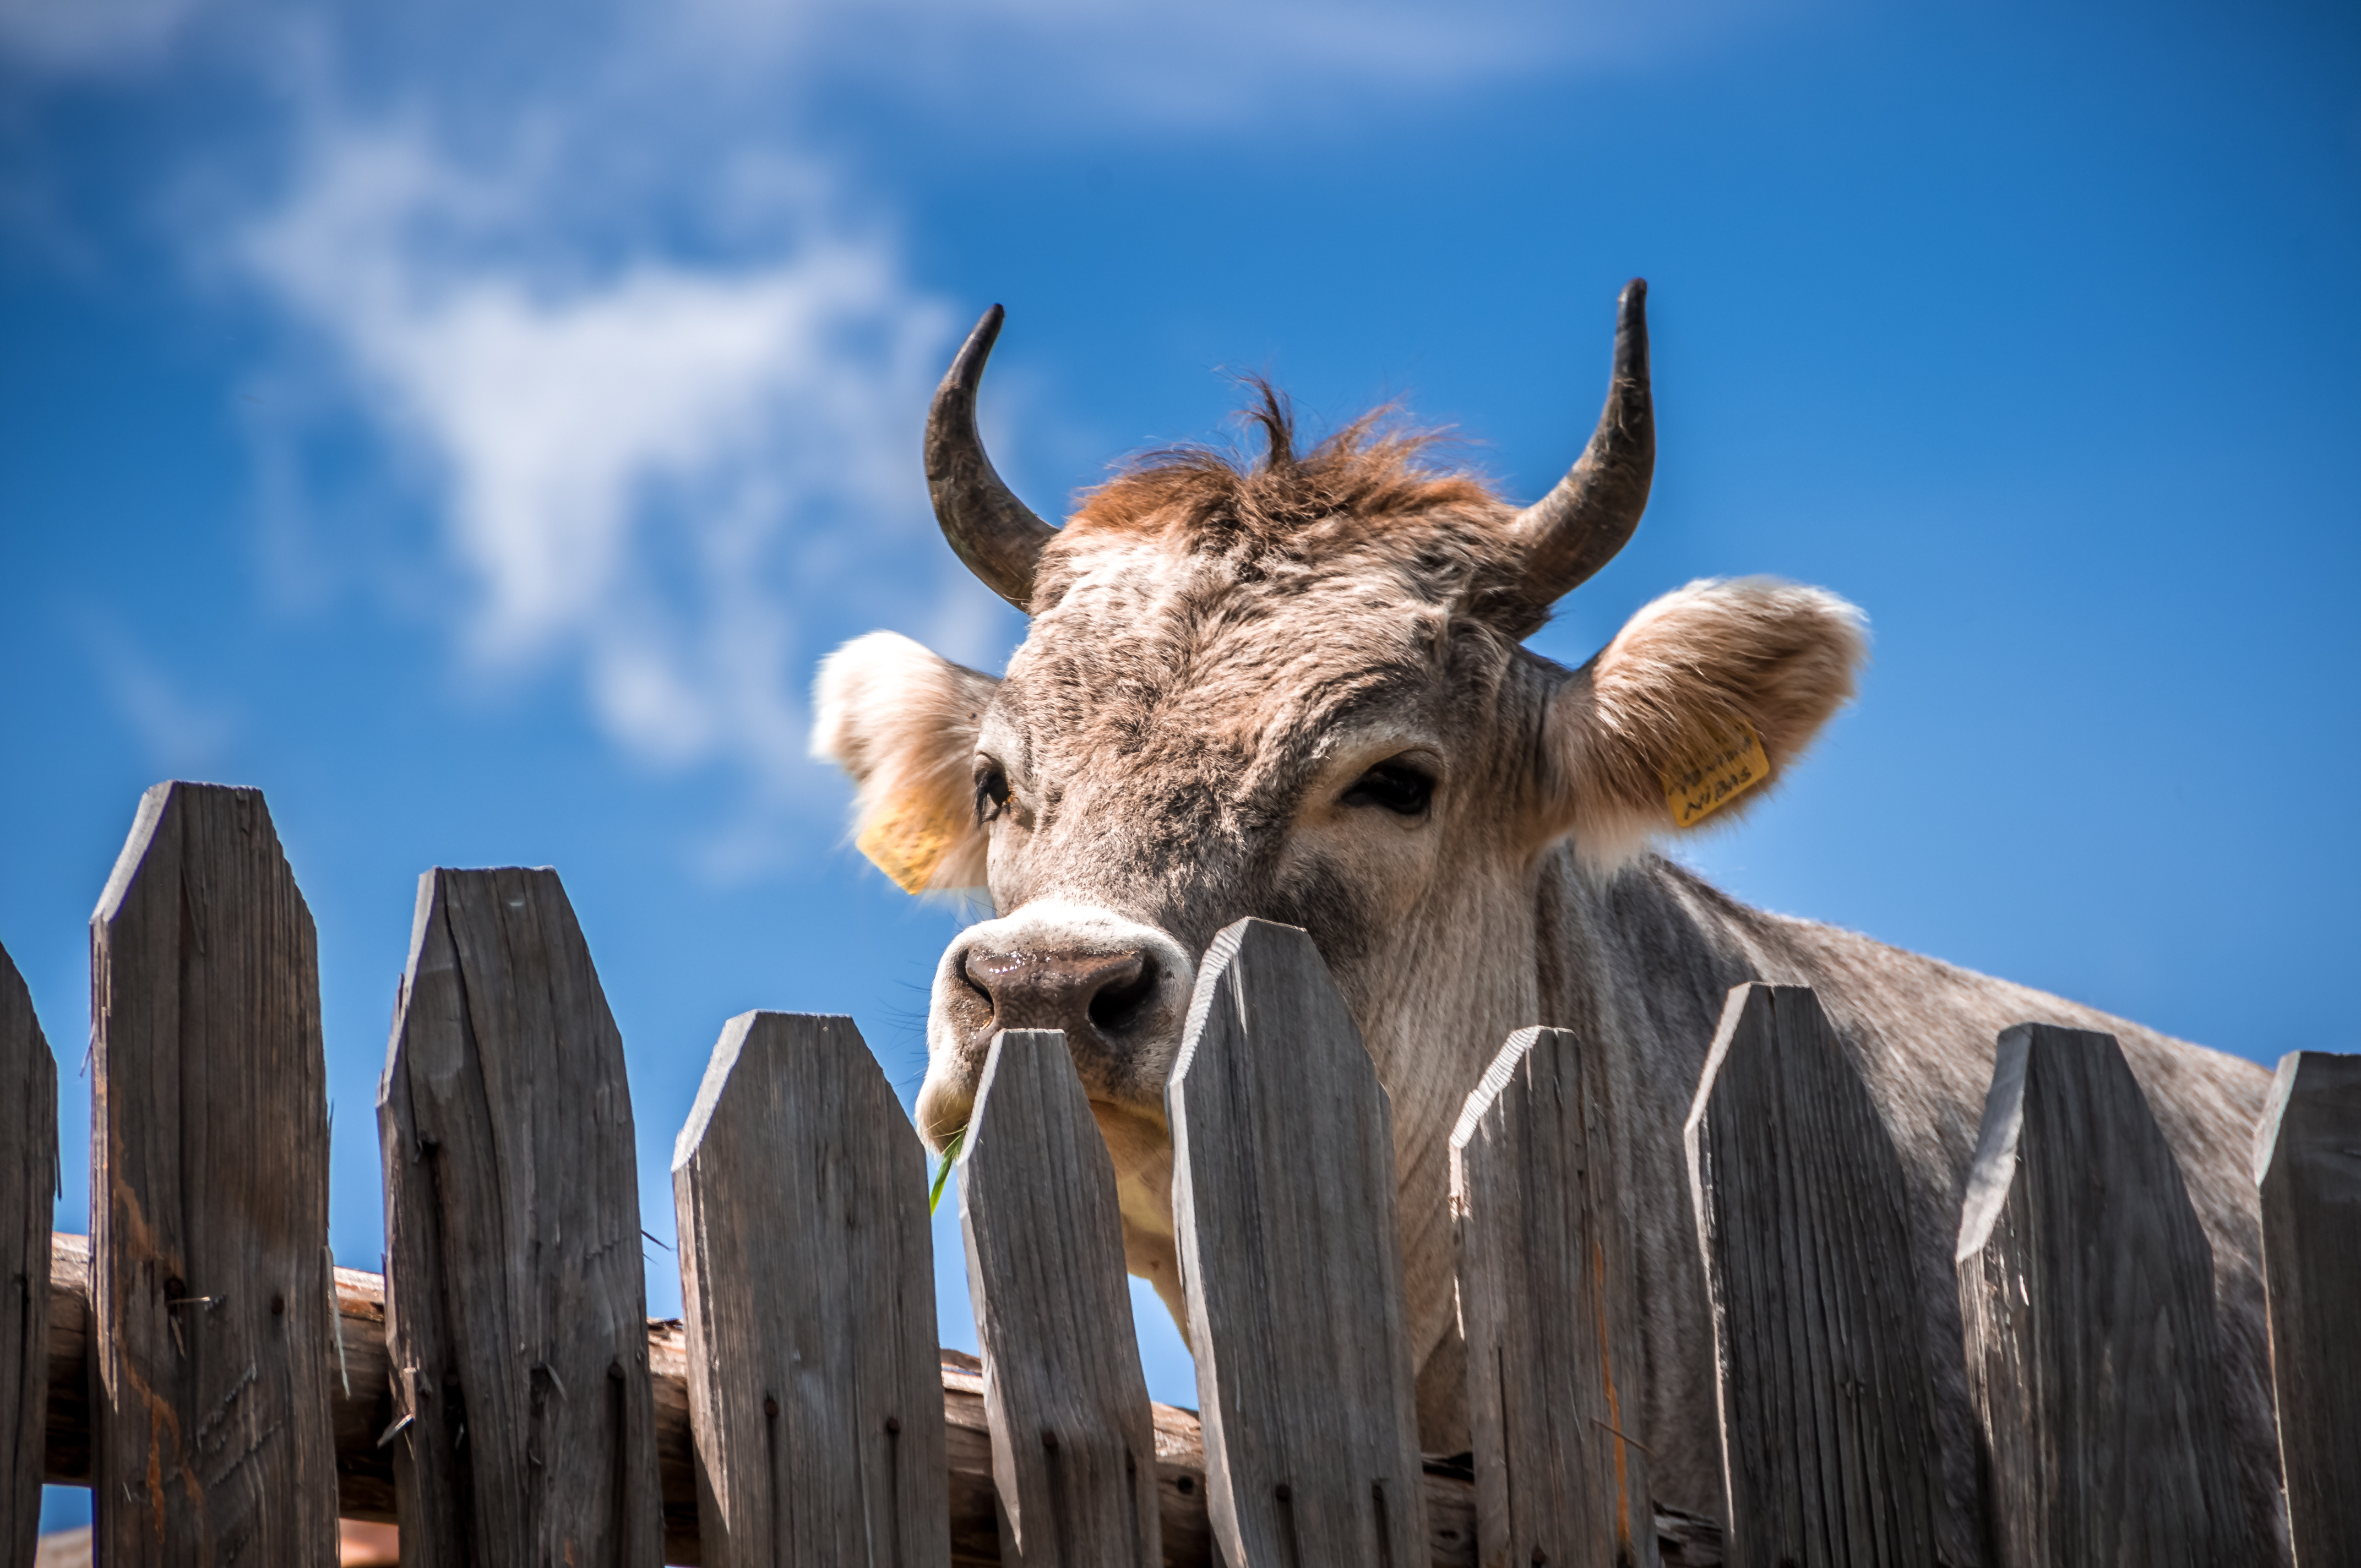 A bull behind a wooden fence